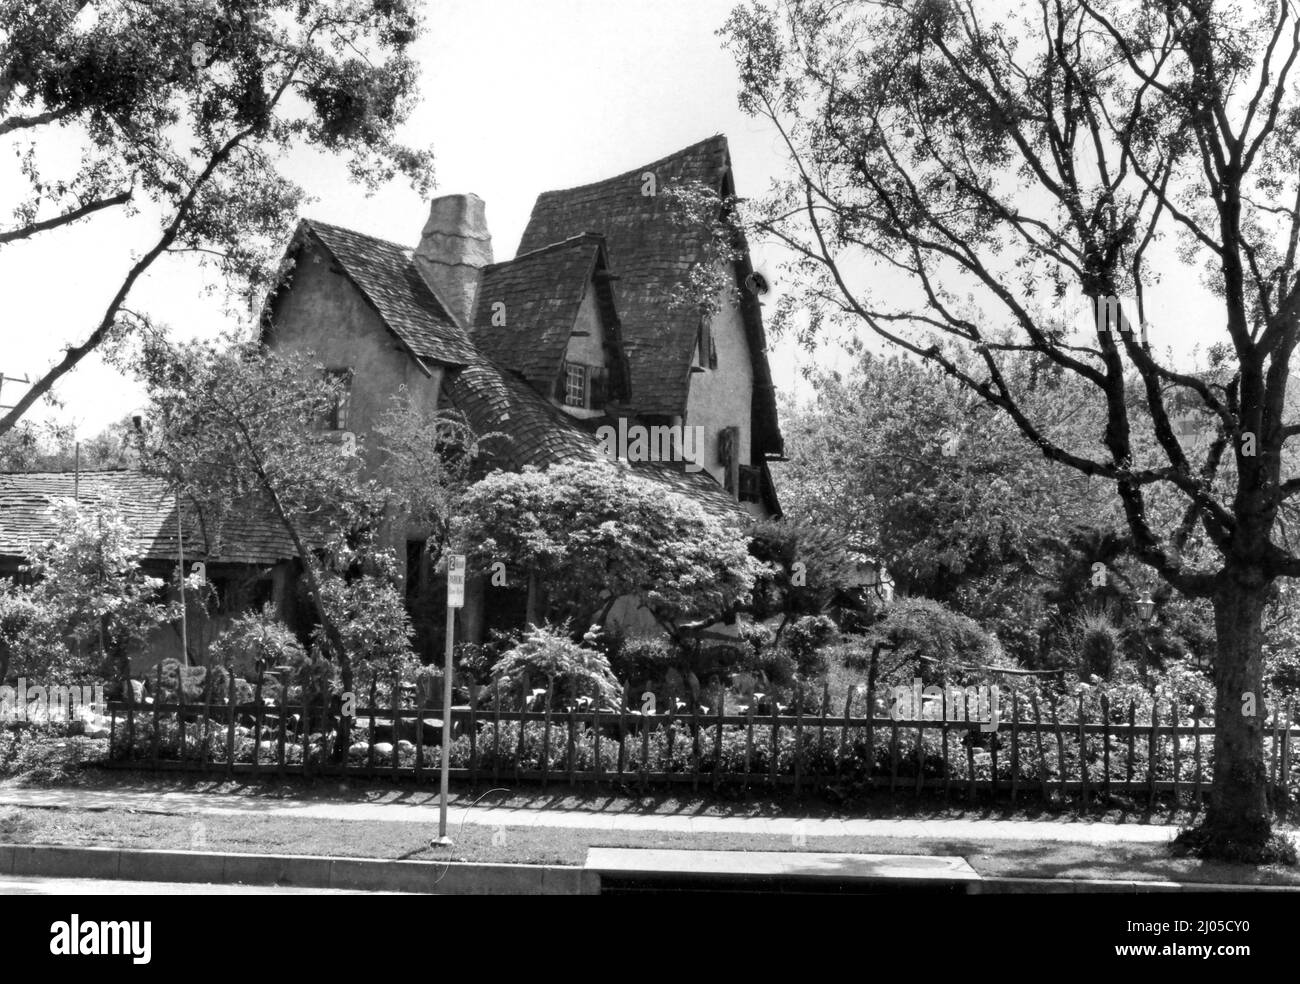 The Willat House in Beverly Hills, CA., often called the Witch House, was once a studio for silent films in Culver City before being relocated to its current location in a residential neighborhood. Stock Photo